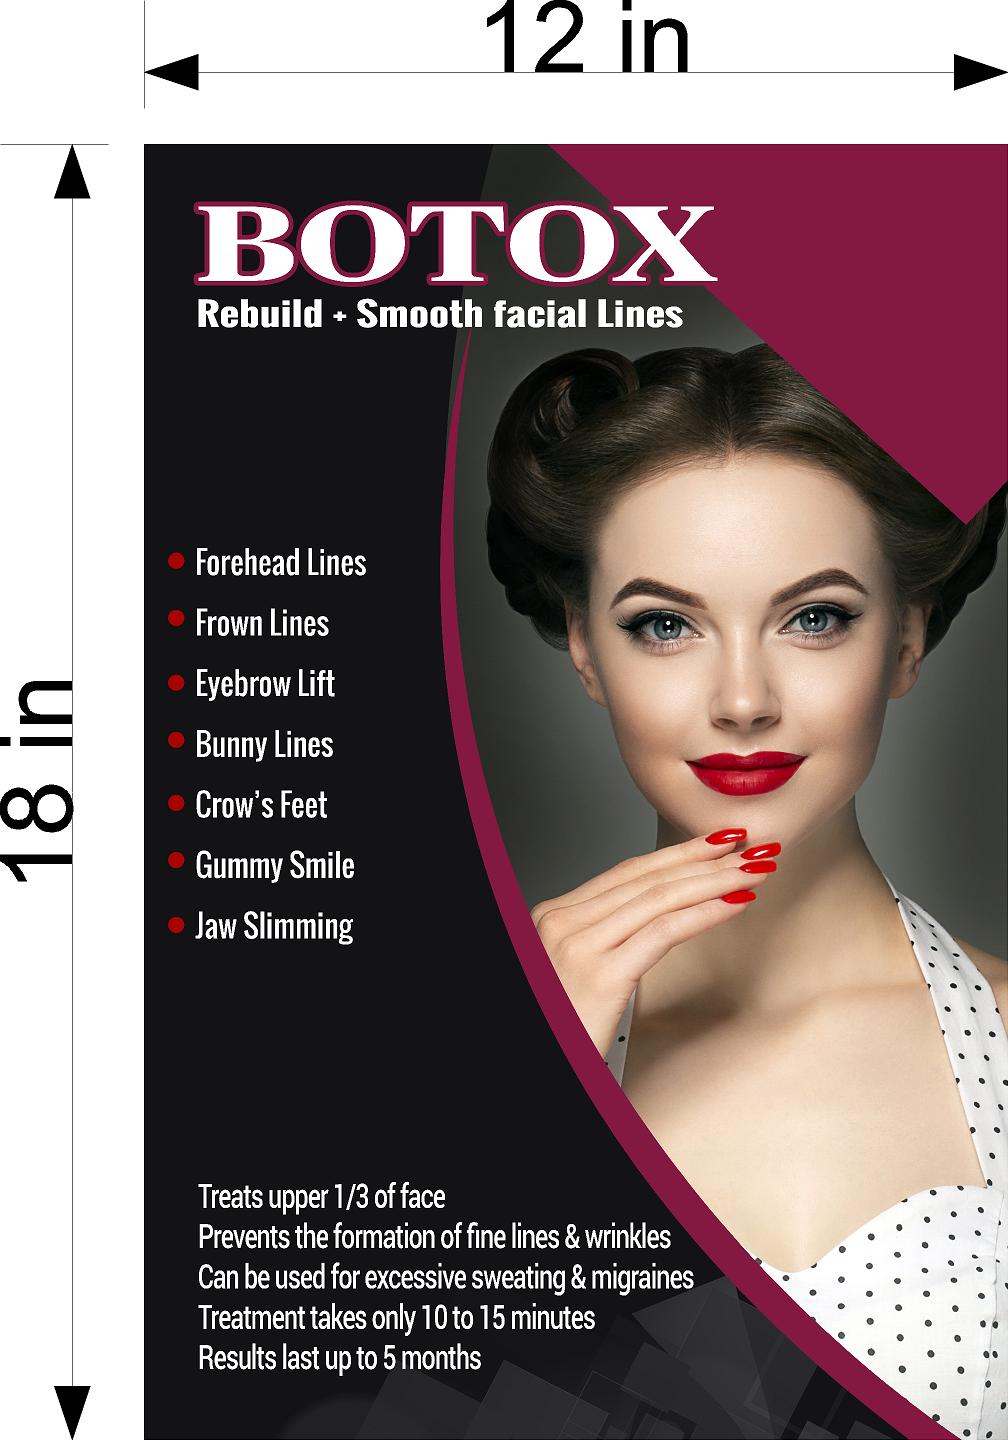 Botox 17 Wallpaper Poster with Adhesive Backing Wall Sticker Decor Indoors Interior Sign Vertical